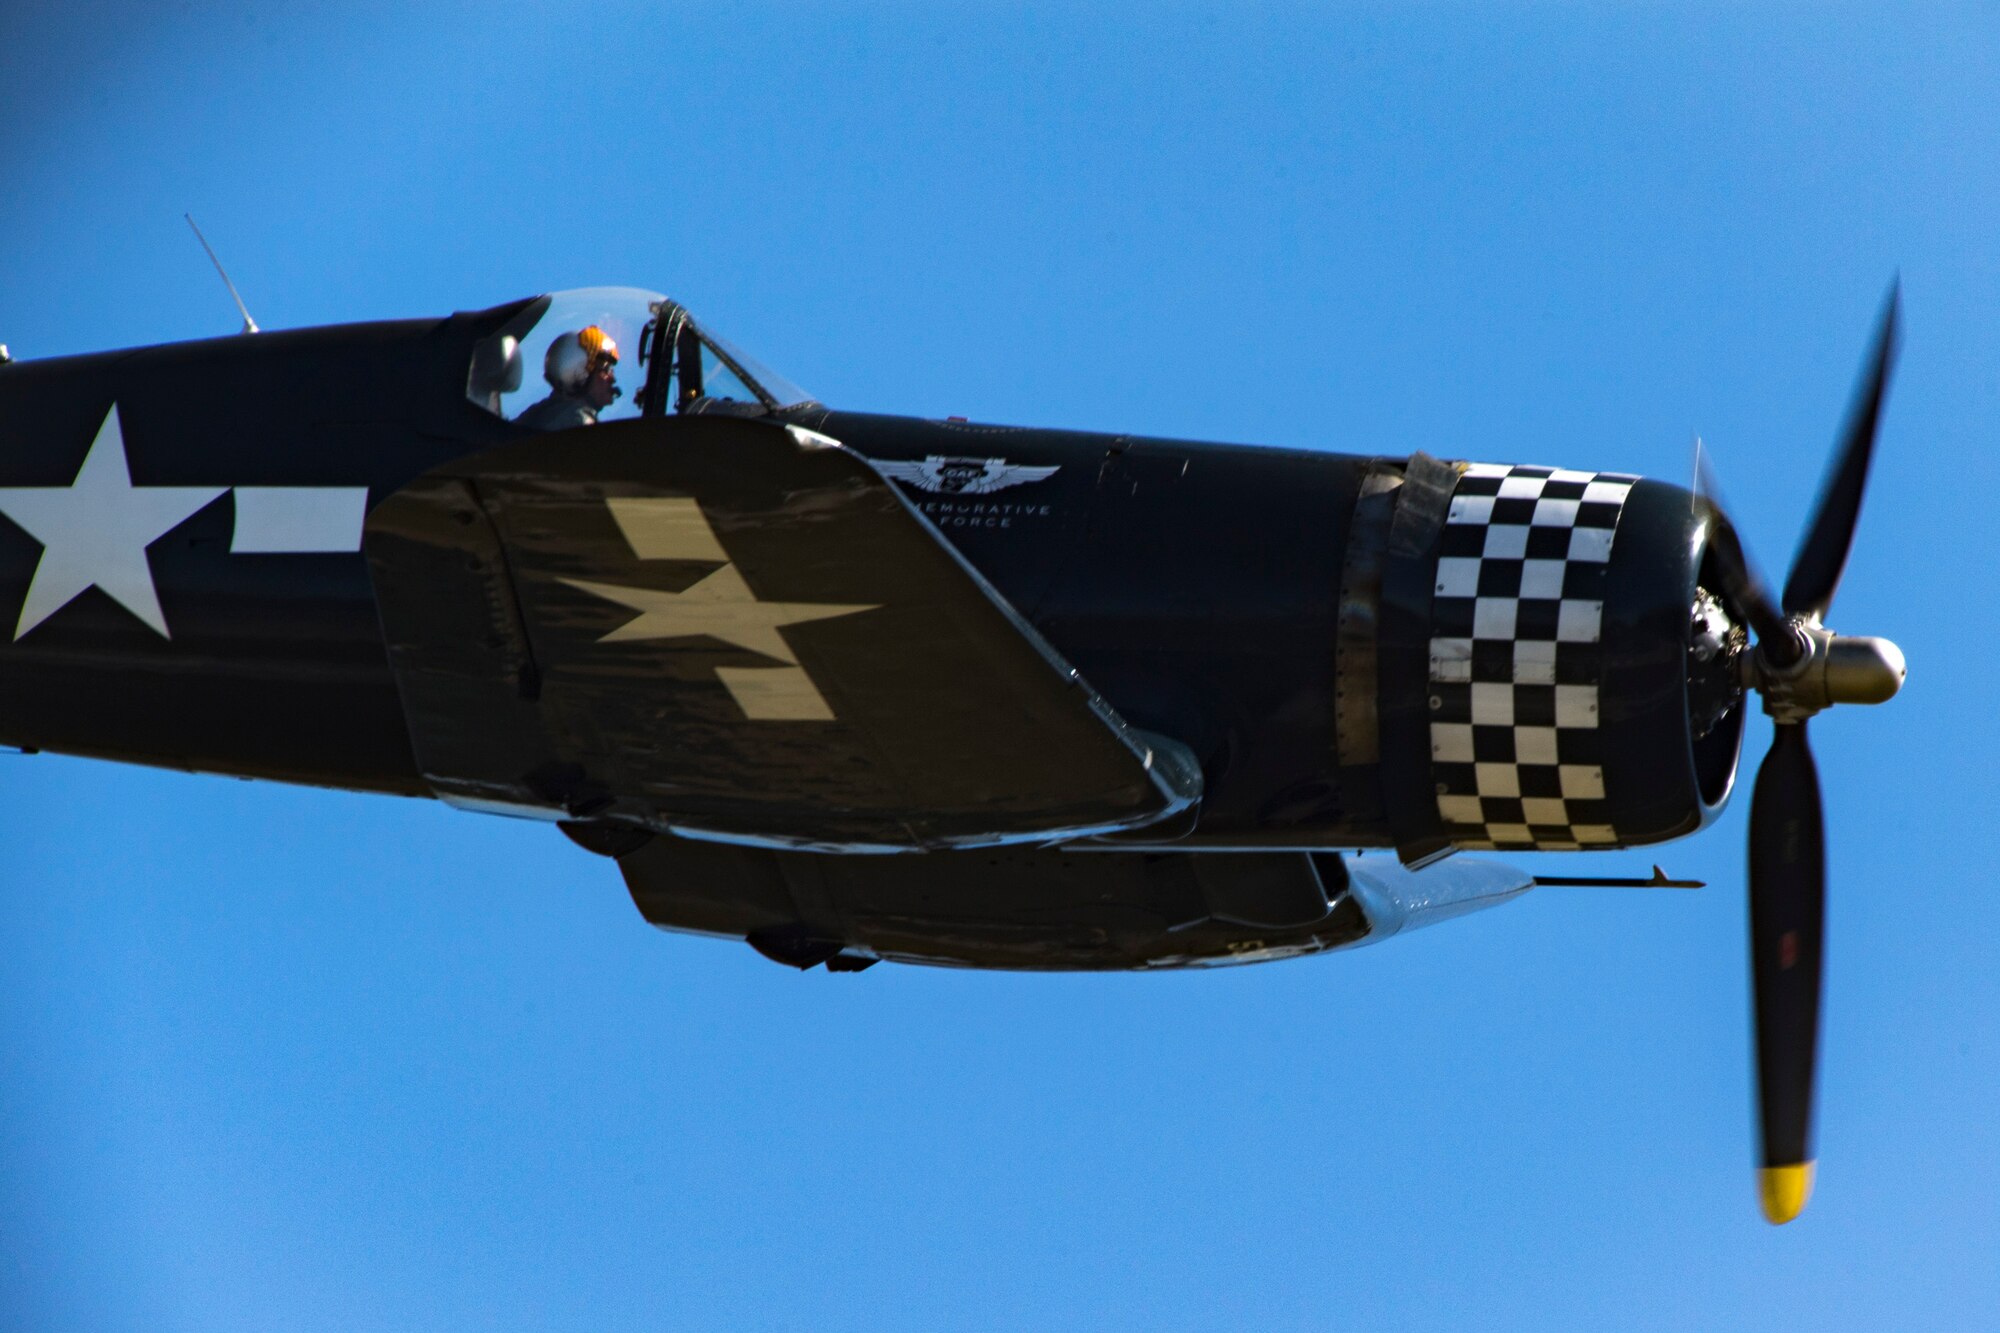 A F4U Corsair flies over Moody Air Force Base, Ga., during the Thunder Over South Georgia Air Show, Oct. 29, 2017. The air show aims to educate the public on past and present Air Force aerial capabilities, increase recruiting and show appreciation to the local community. (U.S. Air Force photo by Senior Airman Daniel Snider)